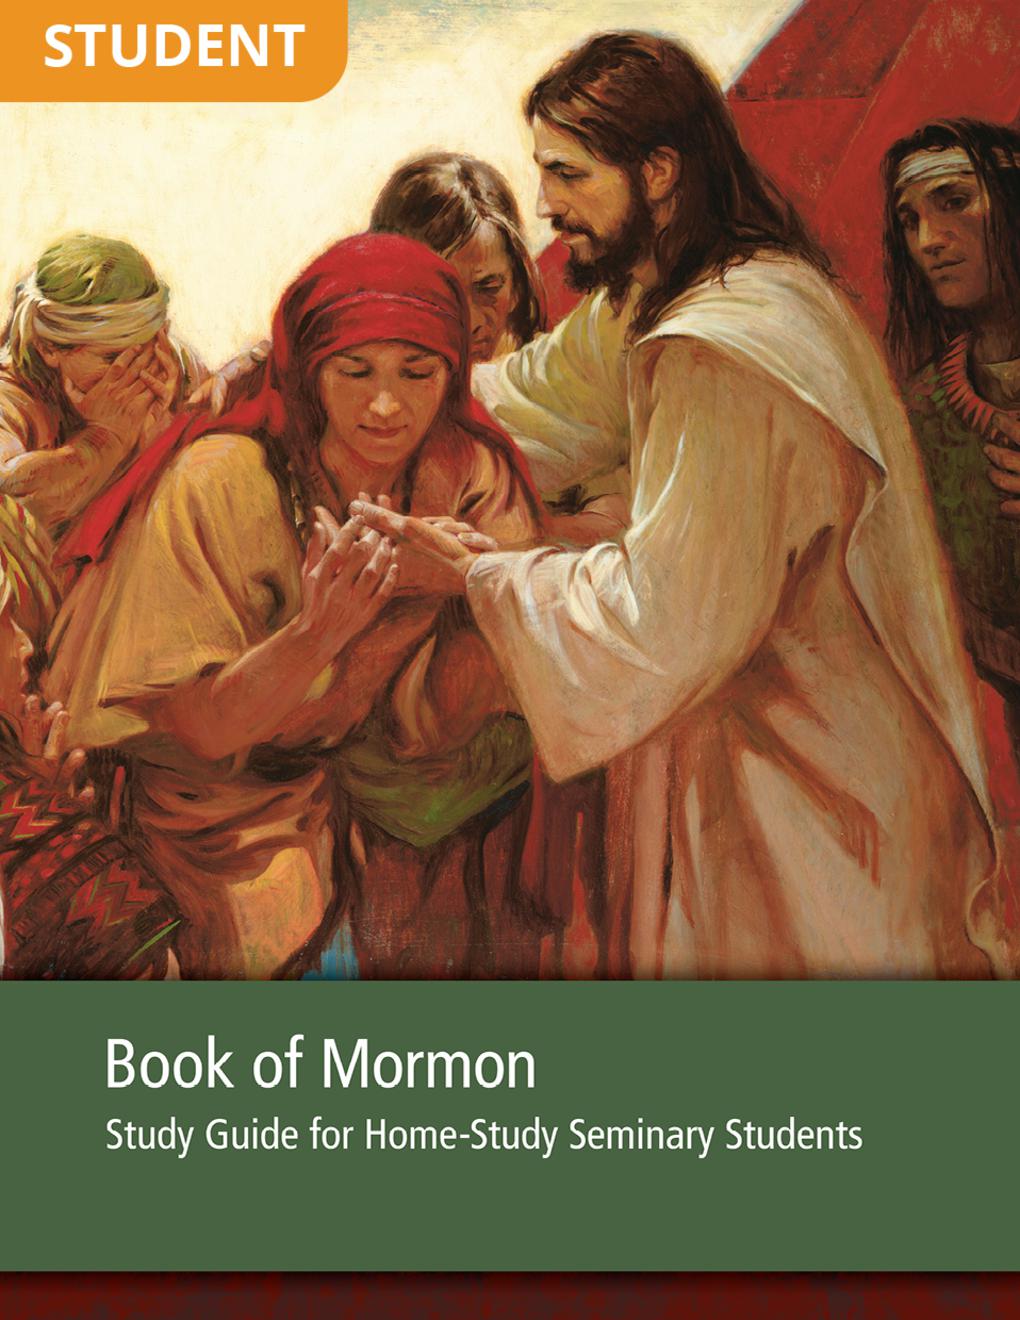 Book of Mormon Study Guide for Home-Study Seminary Students